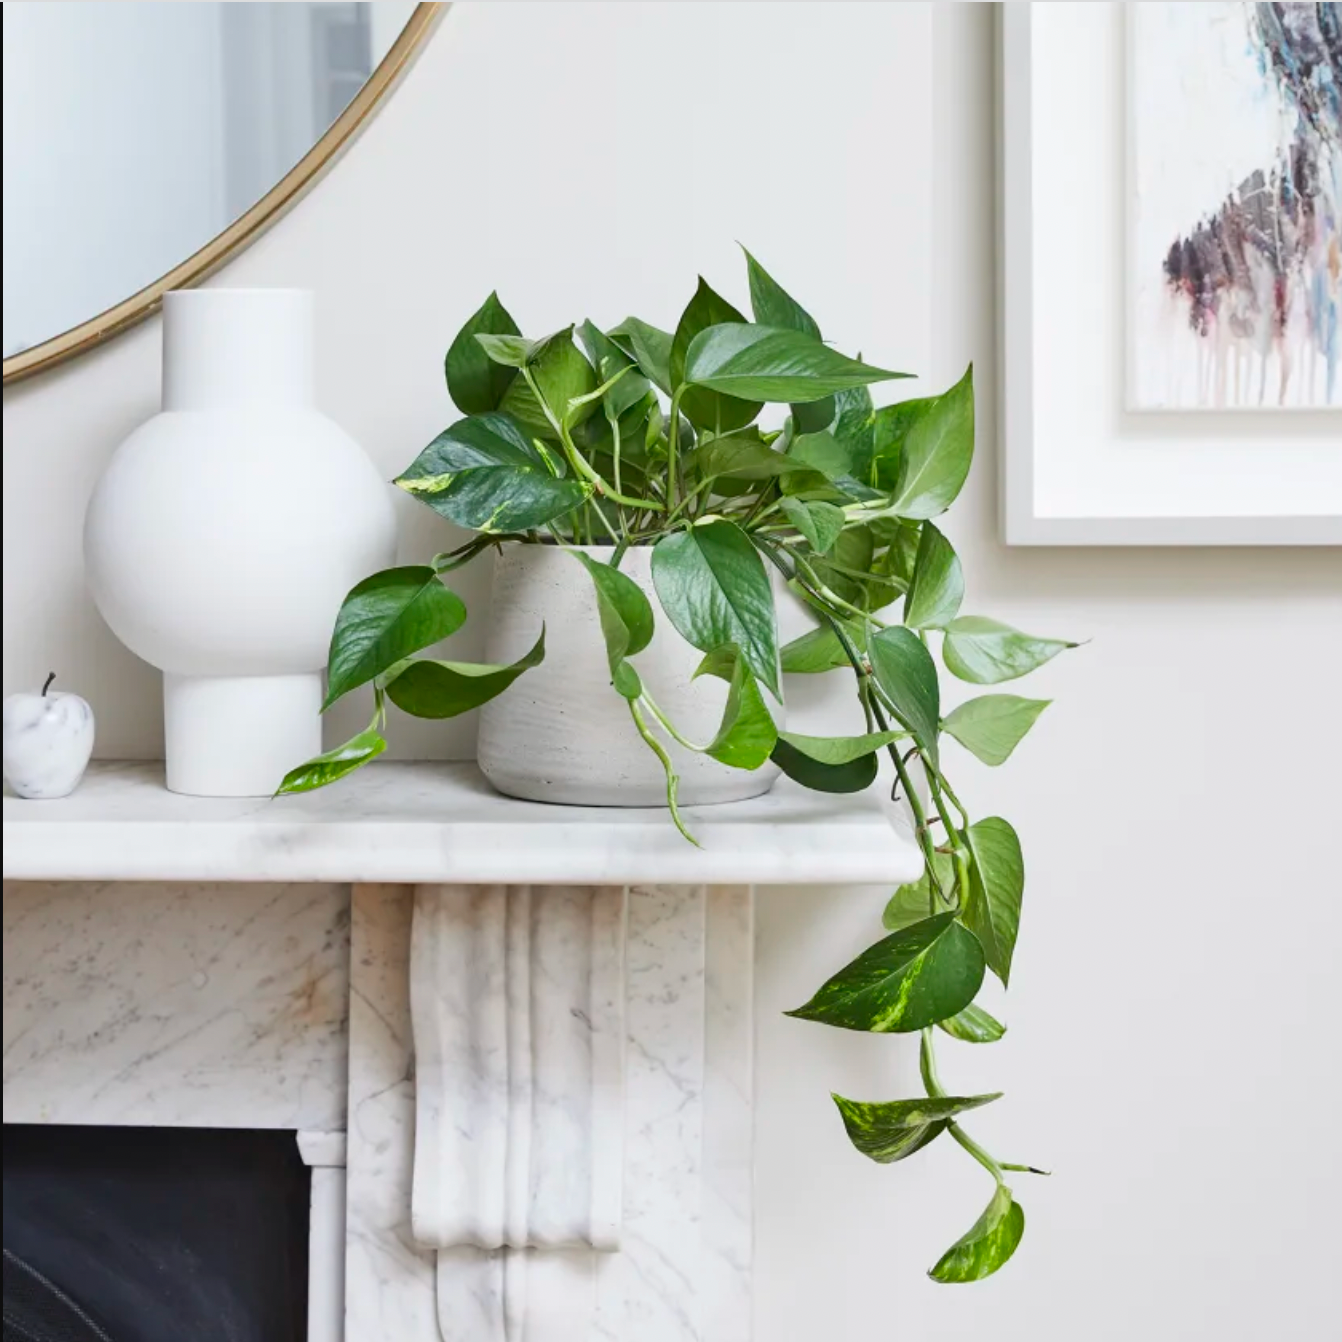 How to care for a pothos plant